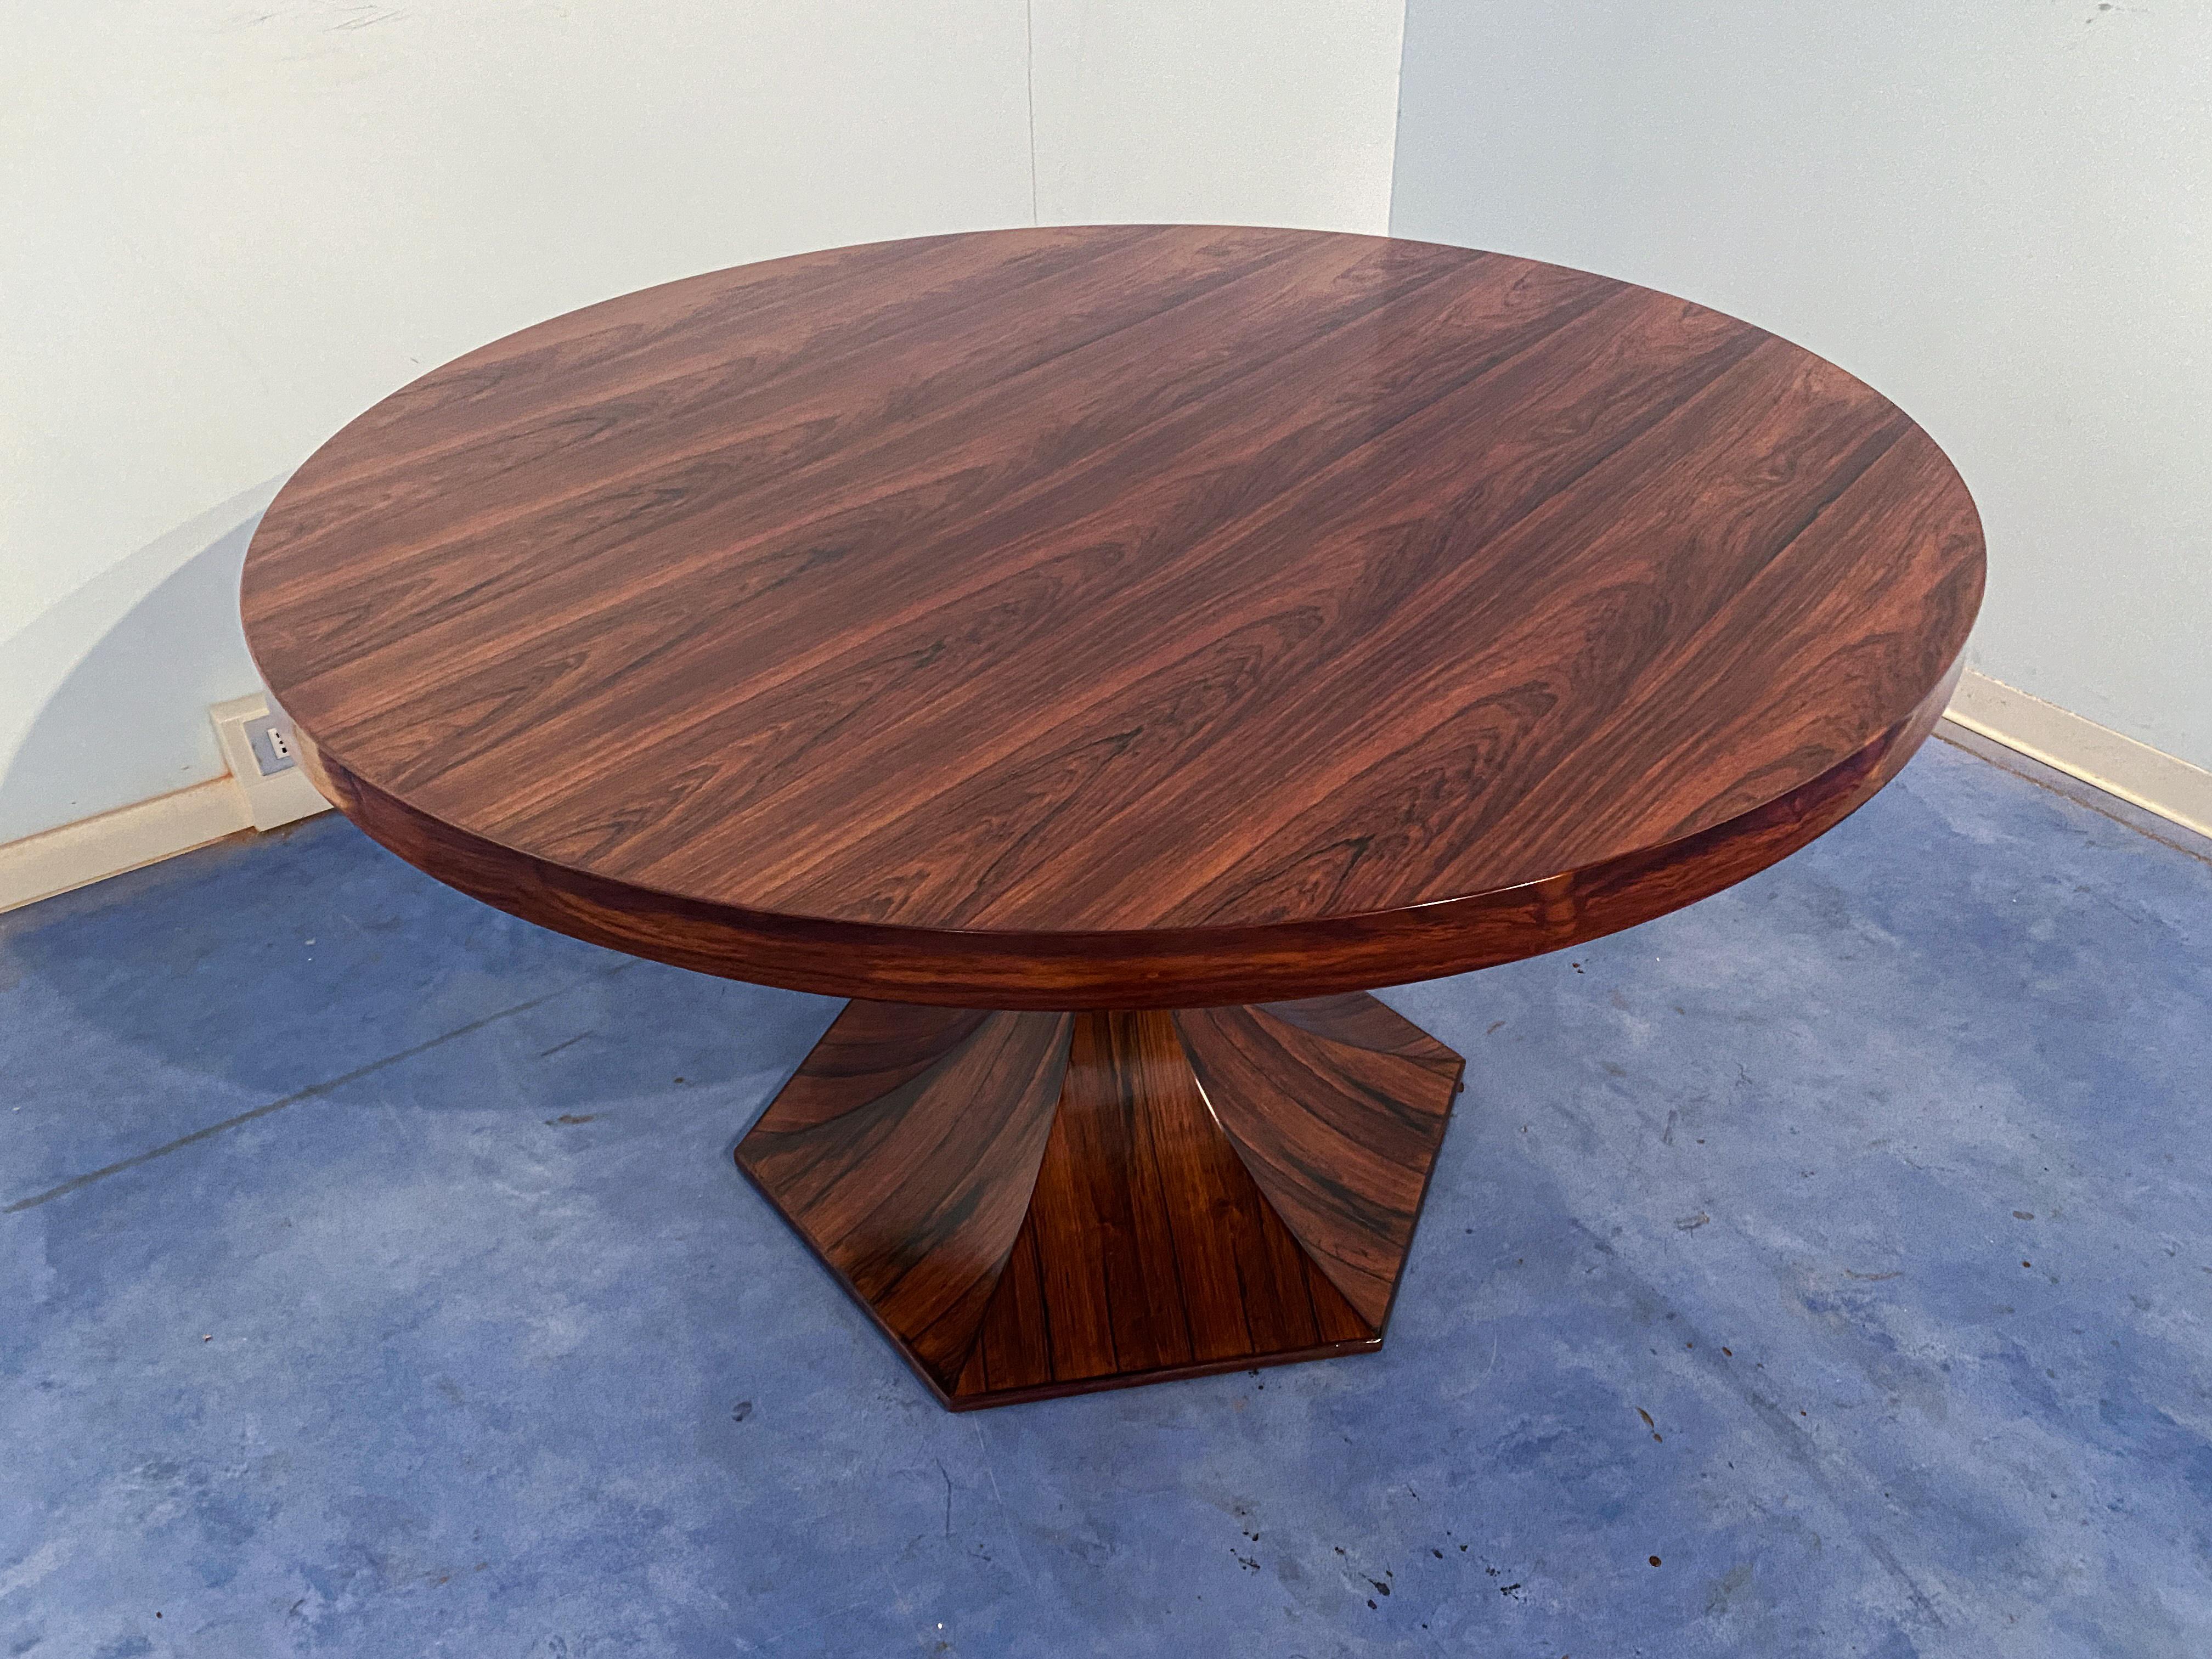 Italian Midcentury Circular Dining Table in Mahogany by Giulio Moscatelli, 1964 In Good Condition For Sale In Traversetolo, IT